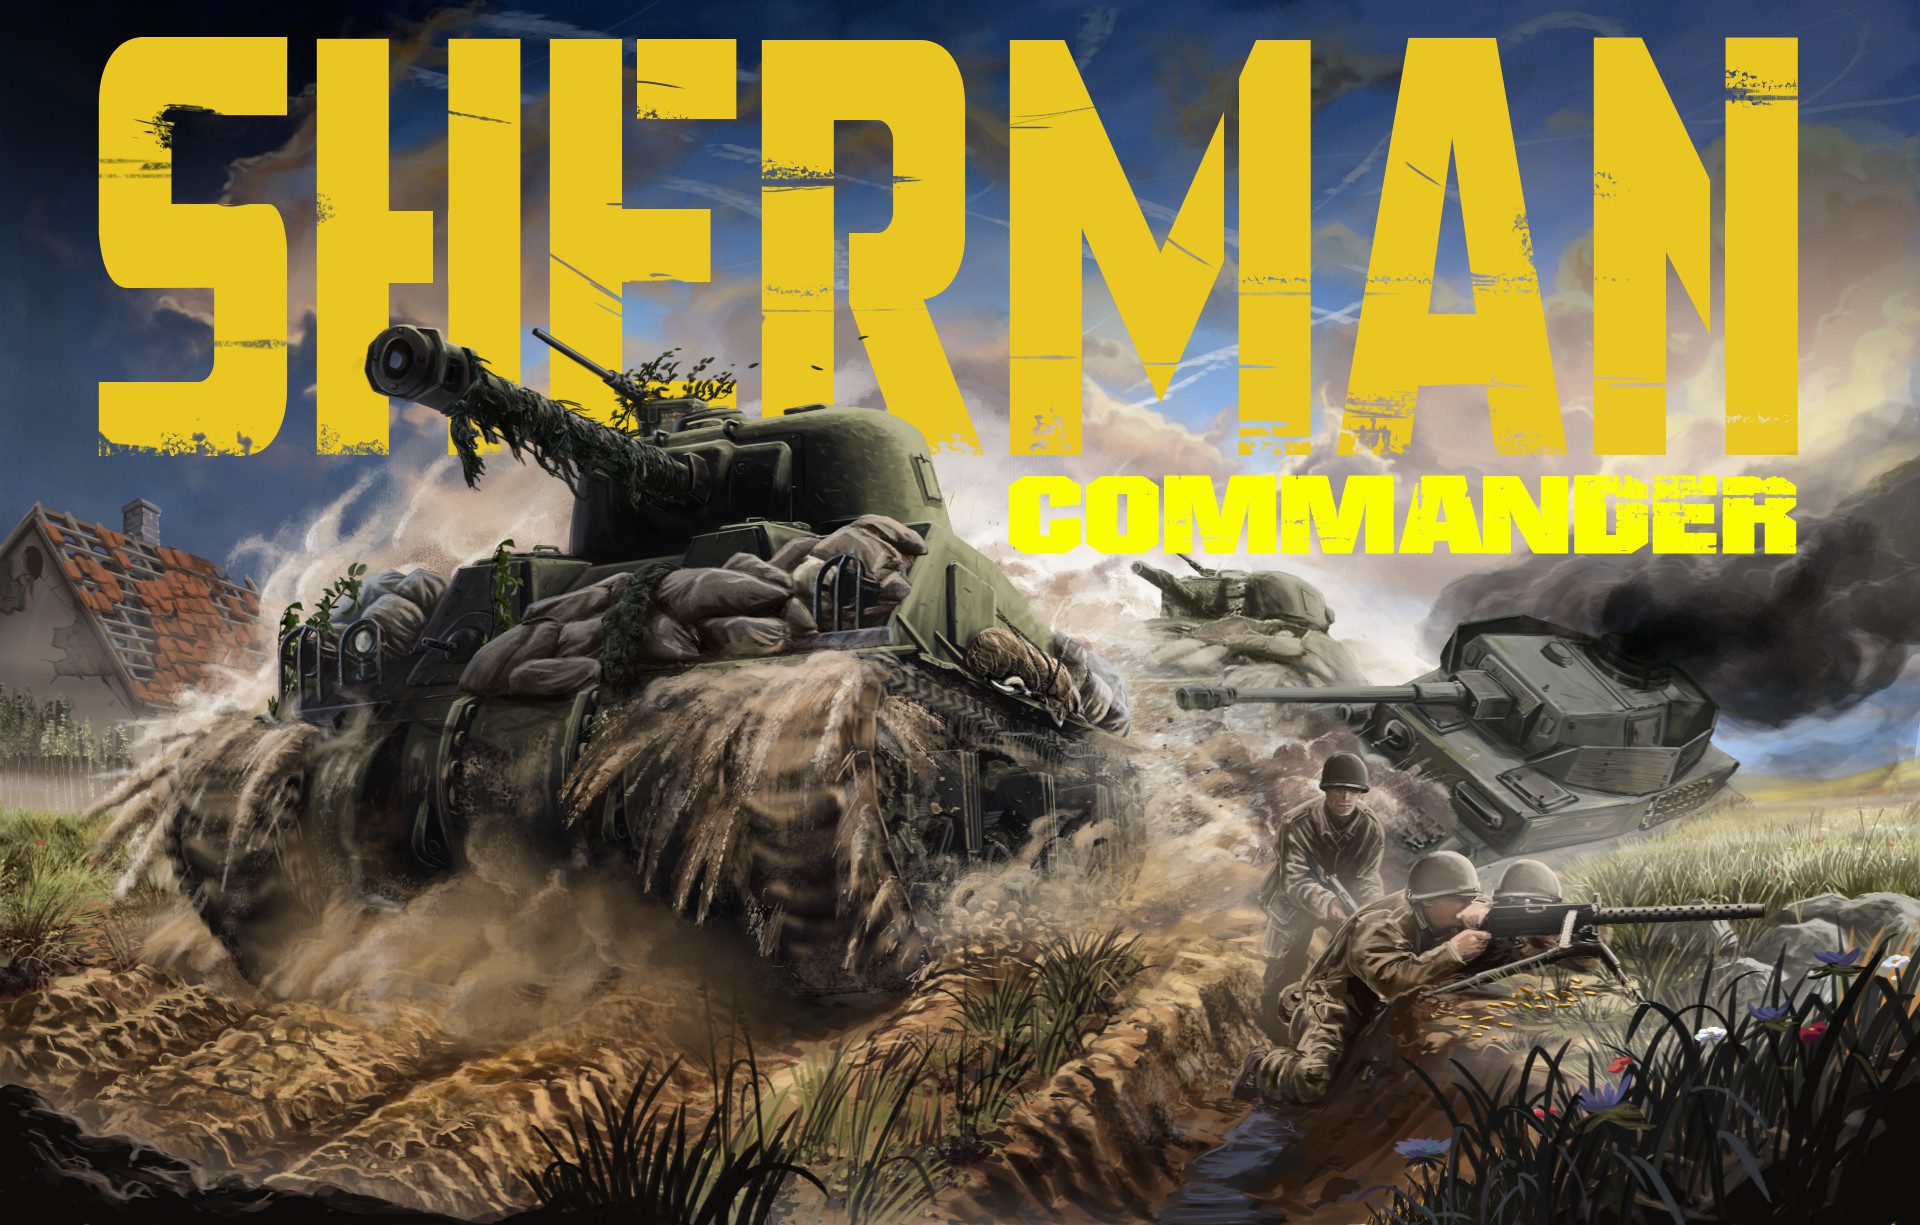 ‘Sherman Commander’ Will Let You Put Patton’s Words Into Action